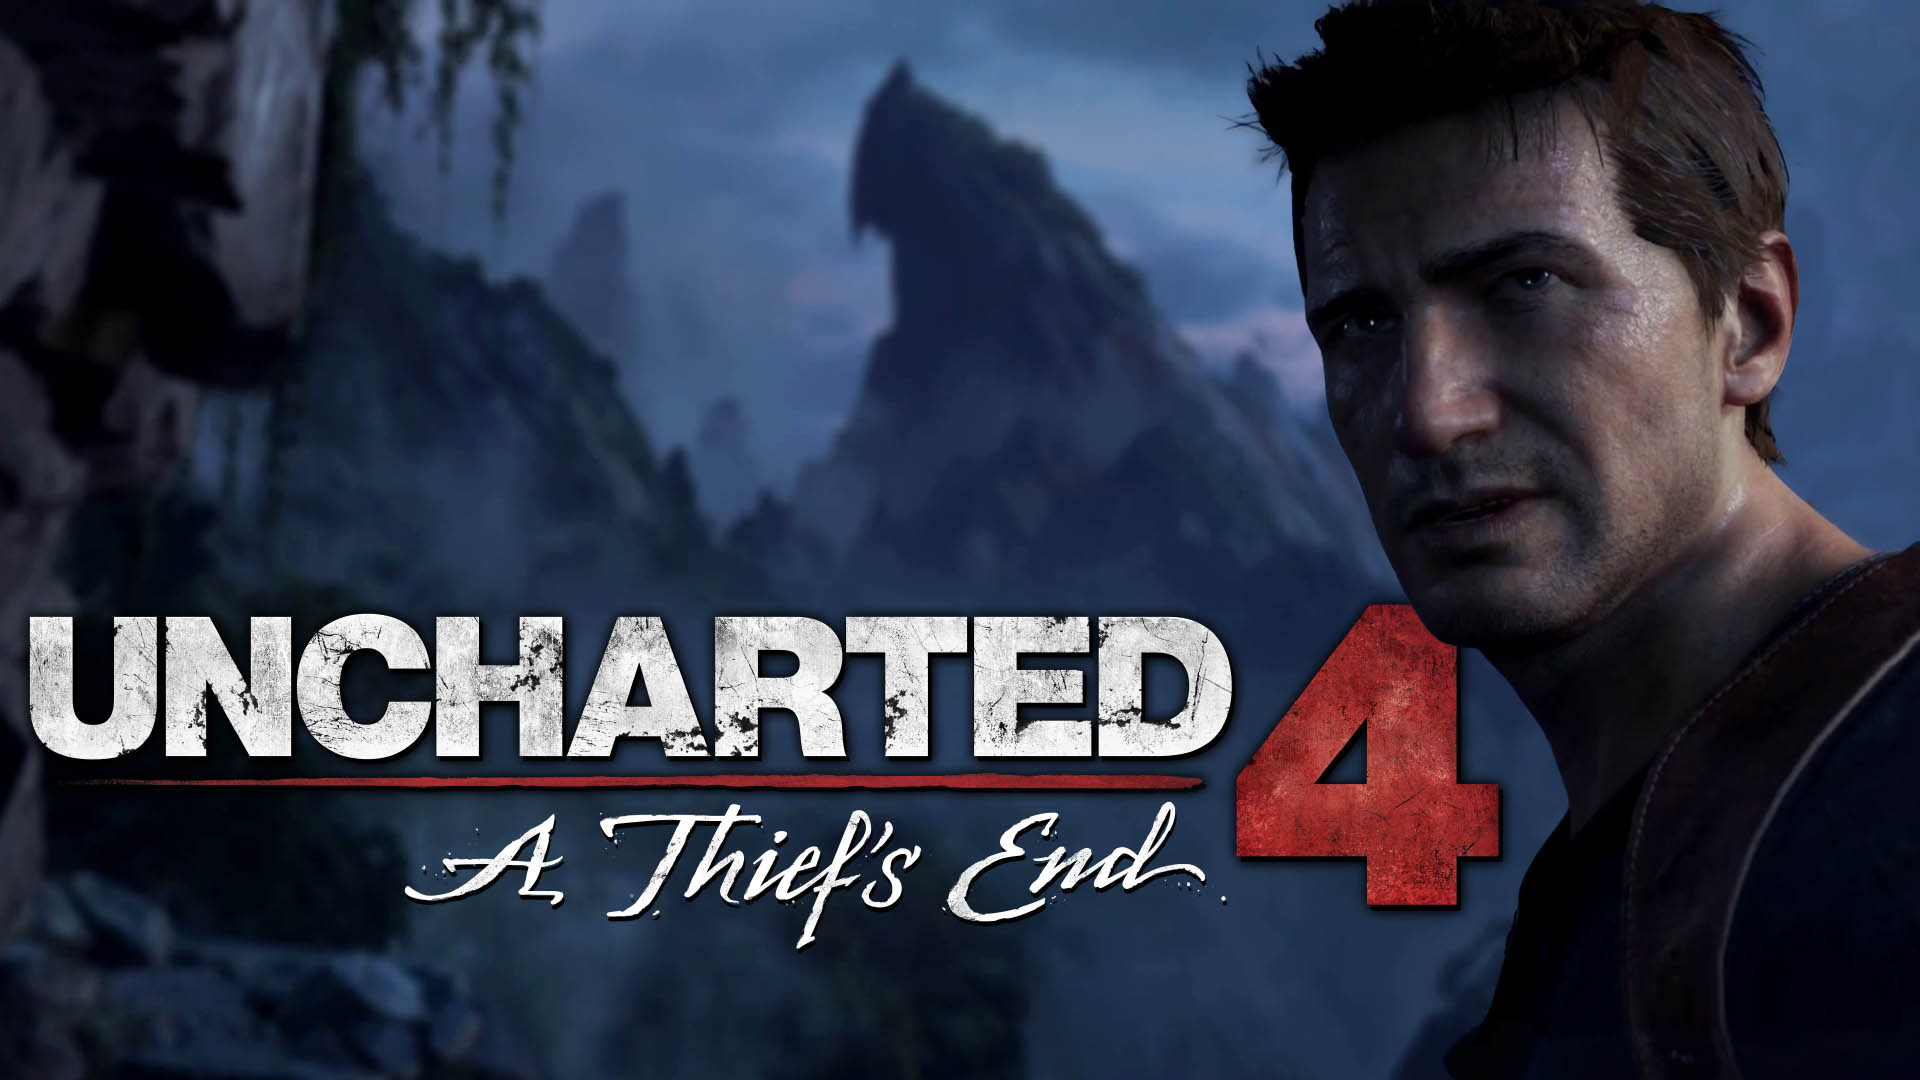 Uncharted 4 A Thief's End - HD Wallpaper 